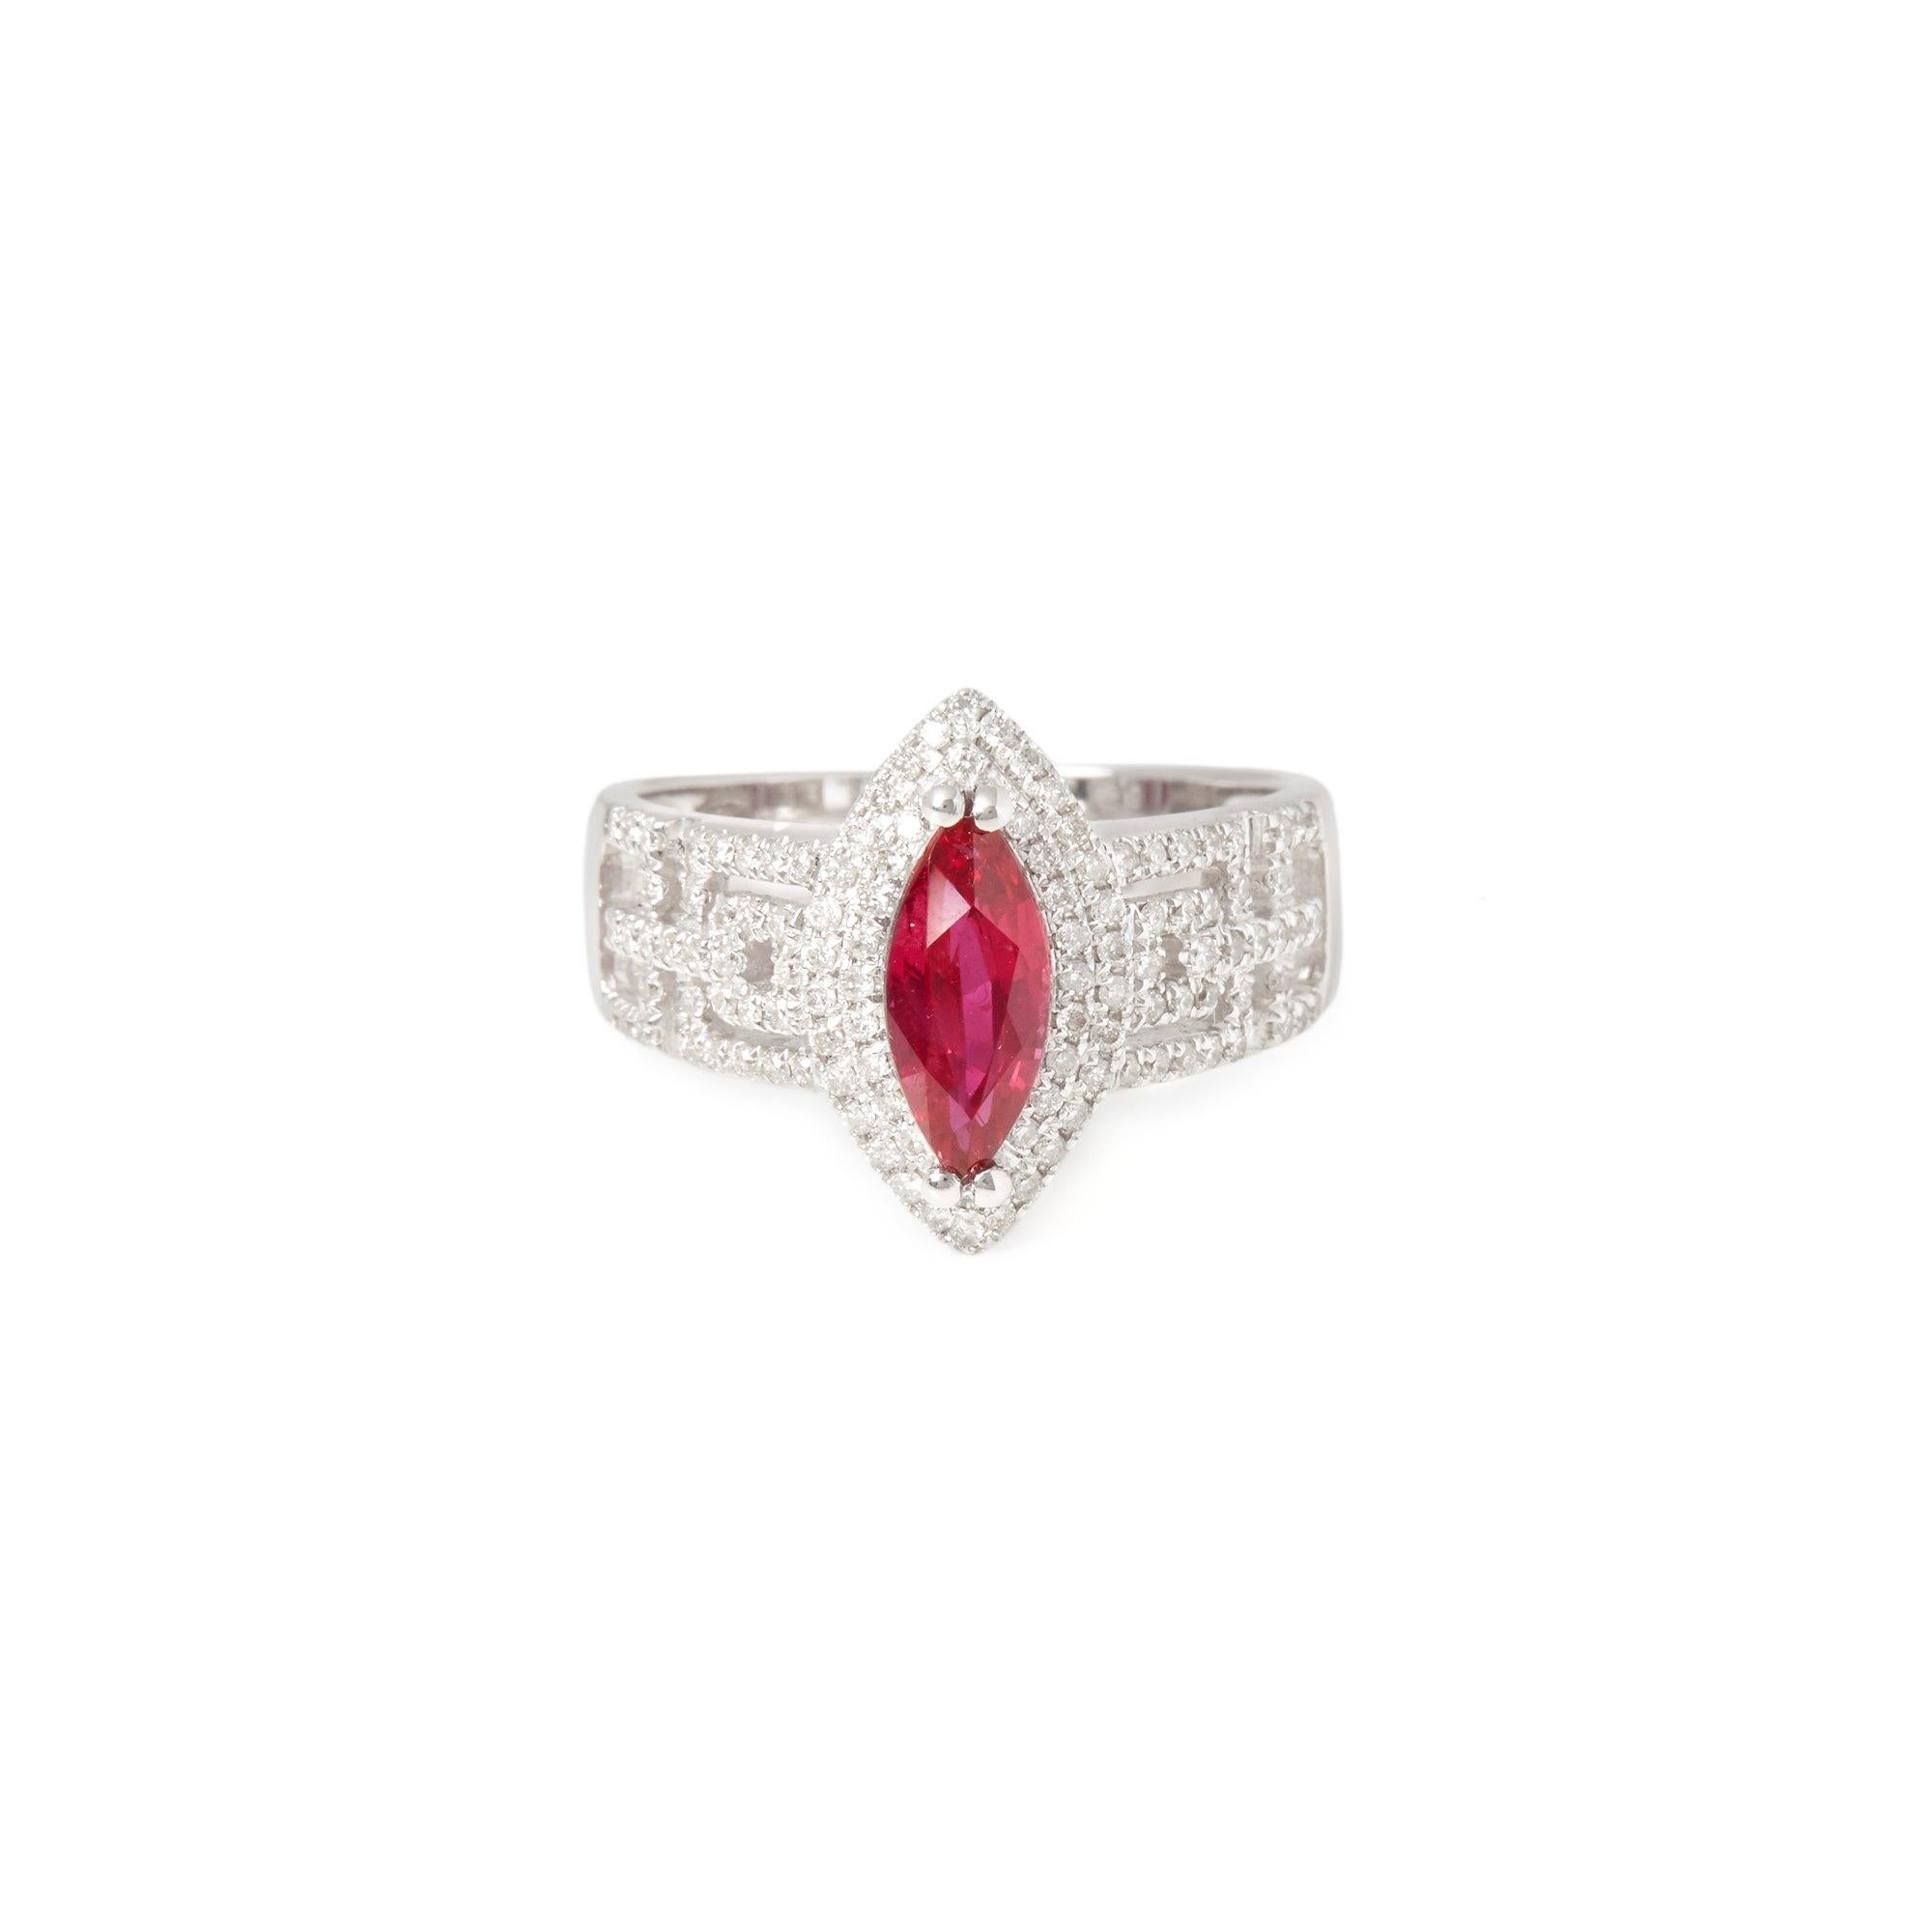 This ring designed by David Jerome is from his private collection and features one natural unheated marquise cut Ruby totalling 1.13cts sourced in Burma. Set with round brilliant cut Diamonds totalling 0.47cts mounted in an 18k white gold setting.